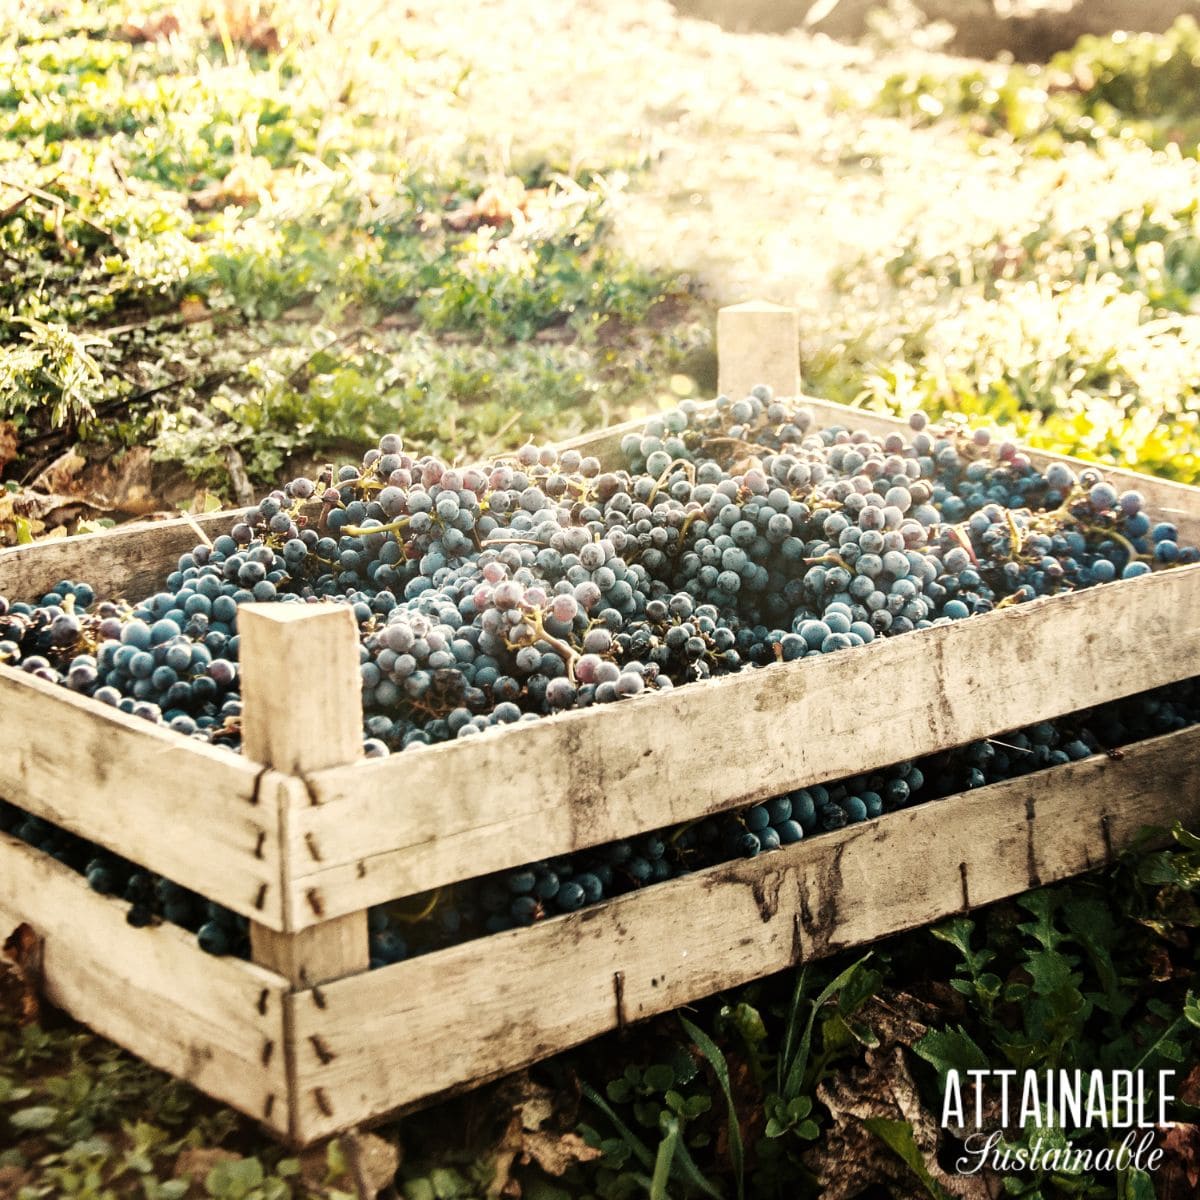 A wooden pallet style bin with an open top outside with harvested black grapes in it. 